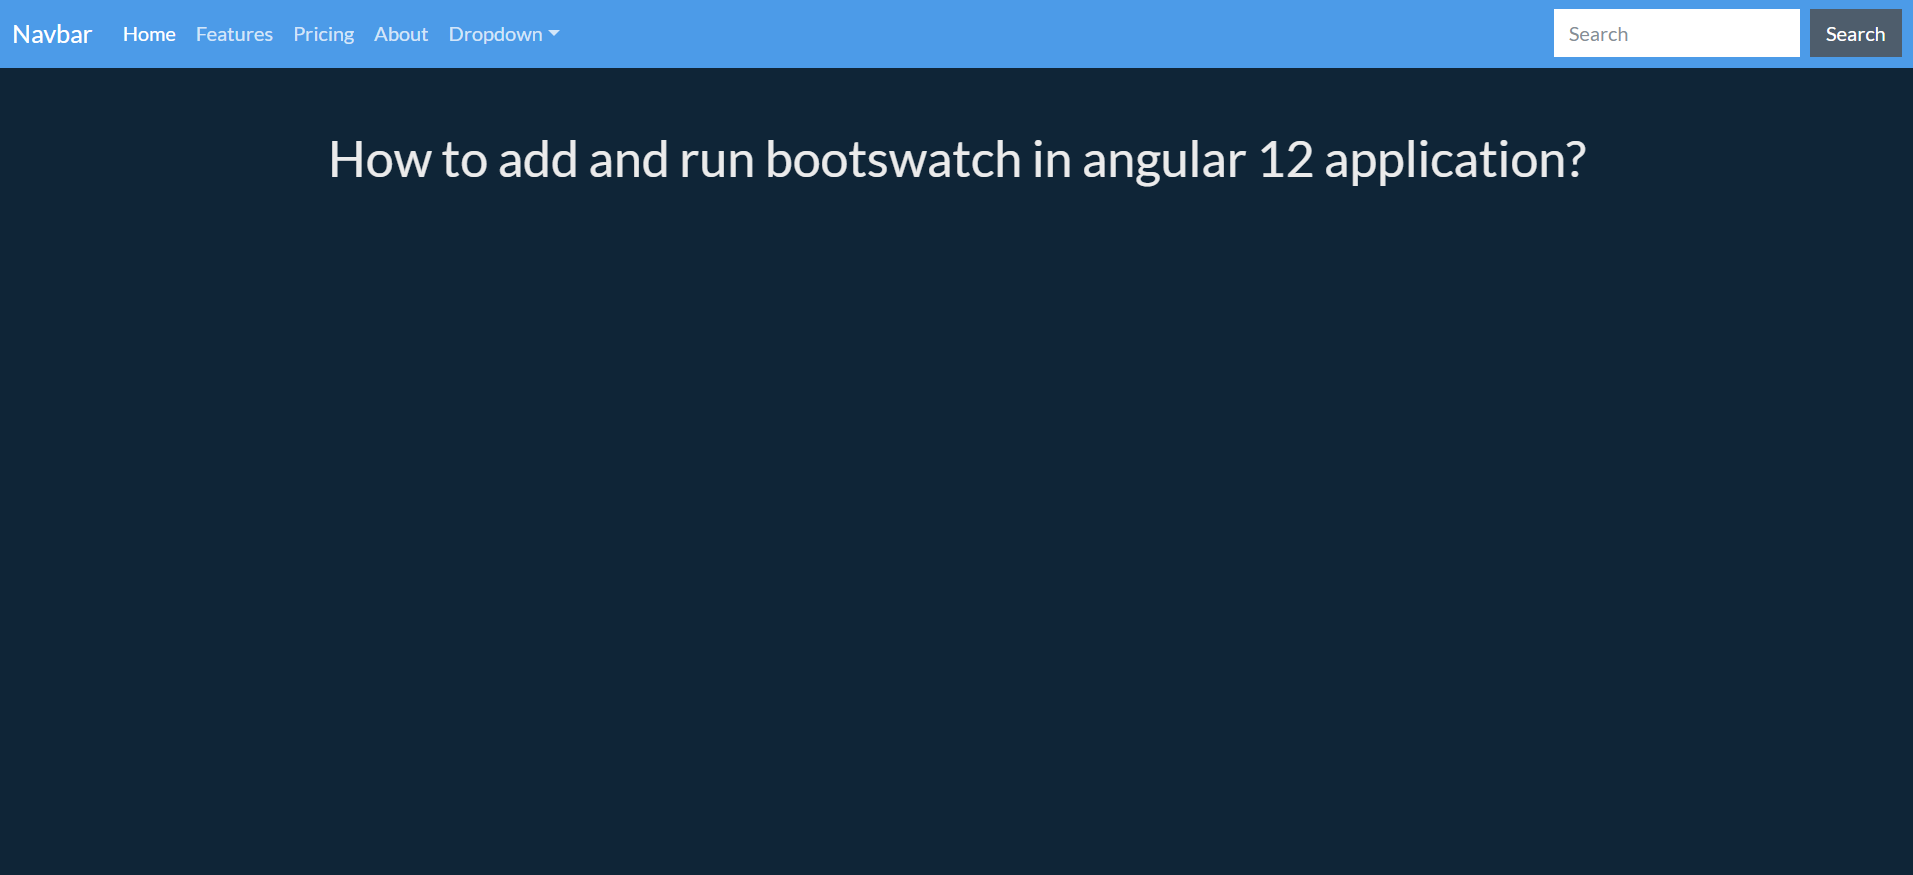 How to add and run bootswatch in angular 12 application?